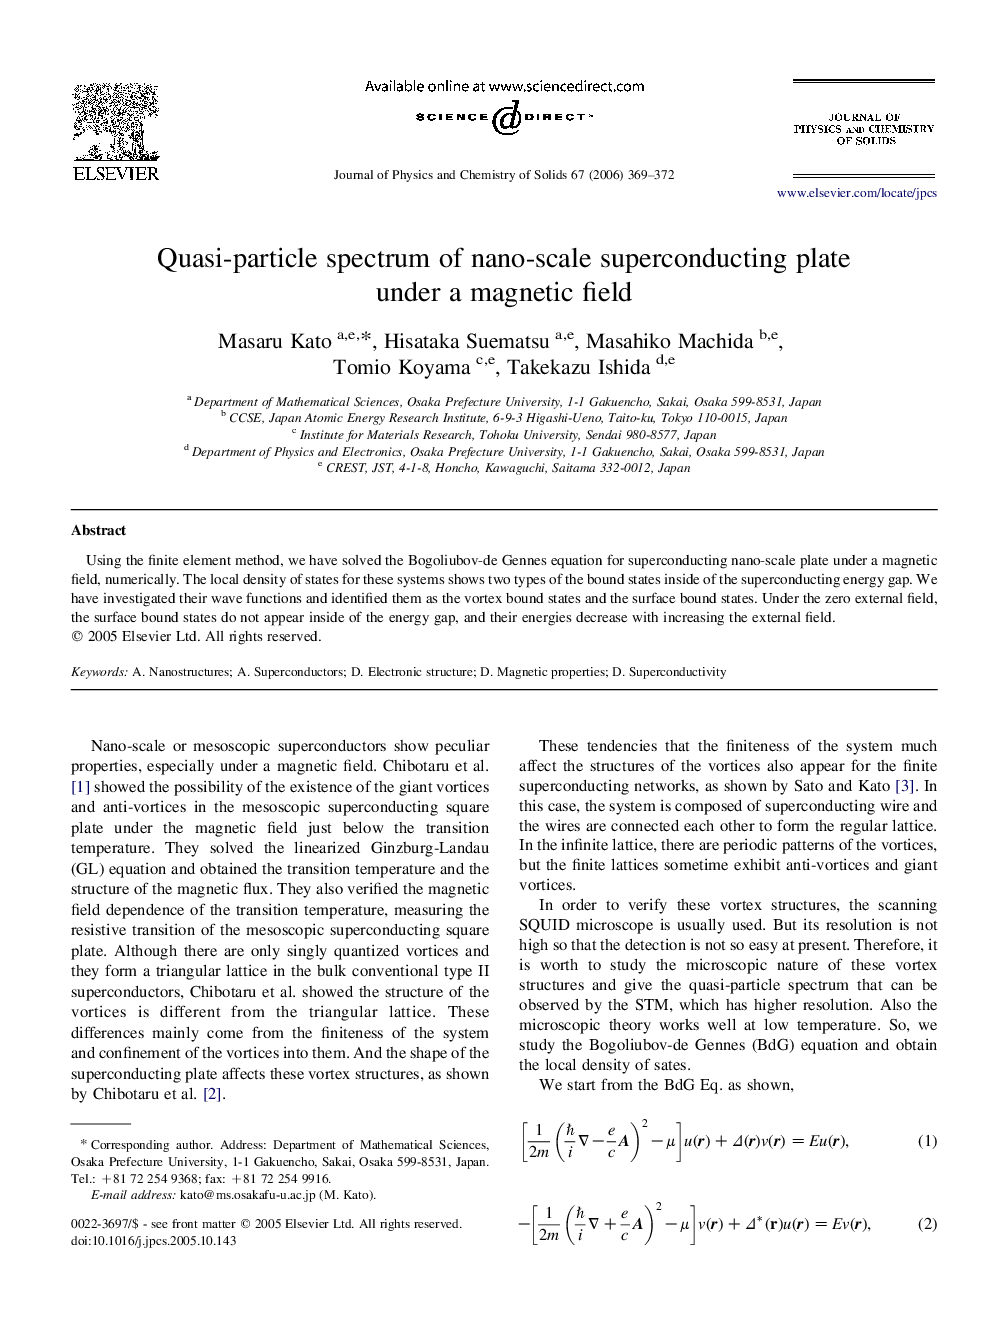 Quasi-particle spectrum of nano-scale superconducting plate under a magnetic field